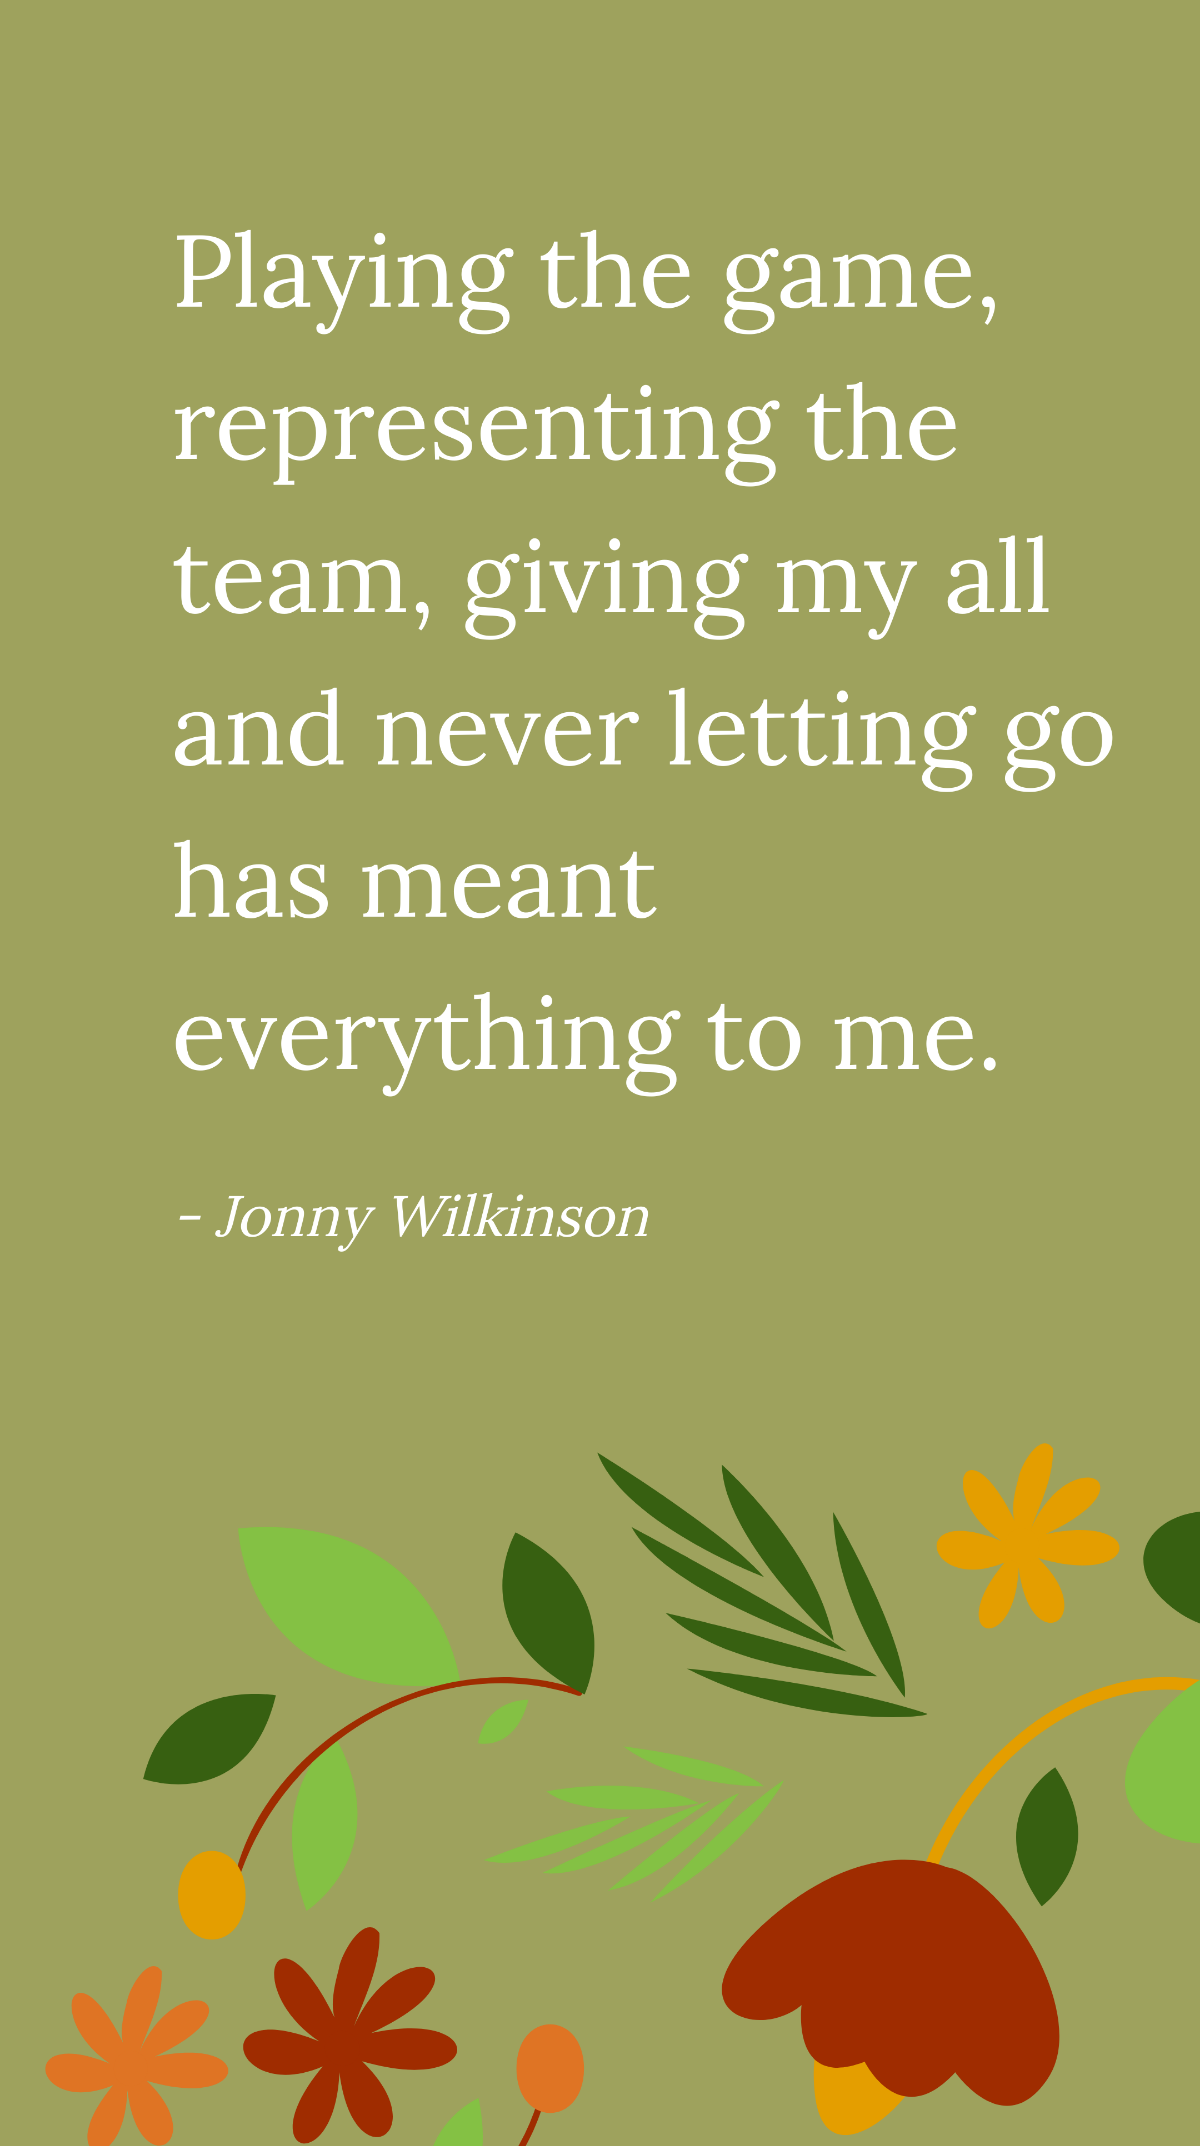 Free Jonny Wilkinson - Playing the game, representing the team, giving my all and never letting go has meant everything to me. Template